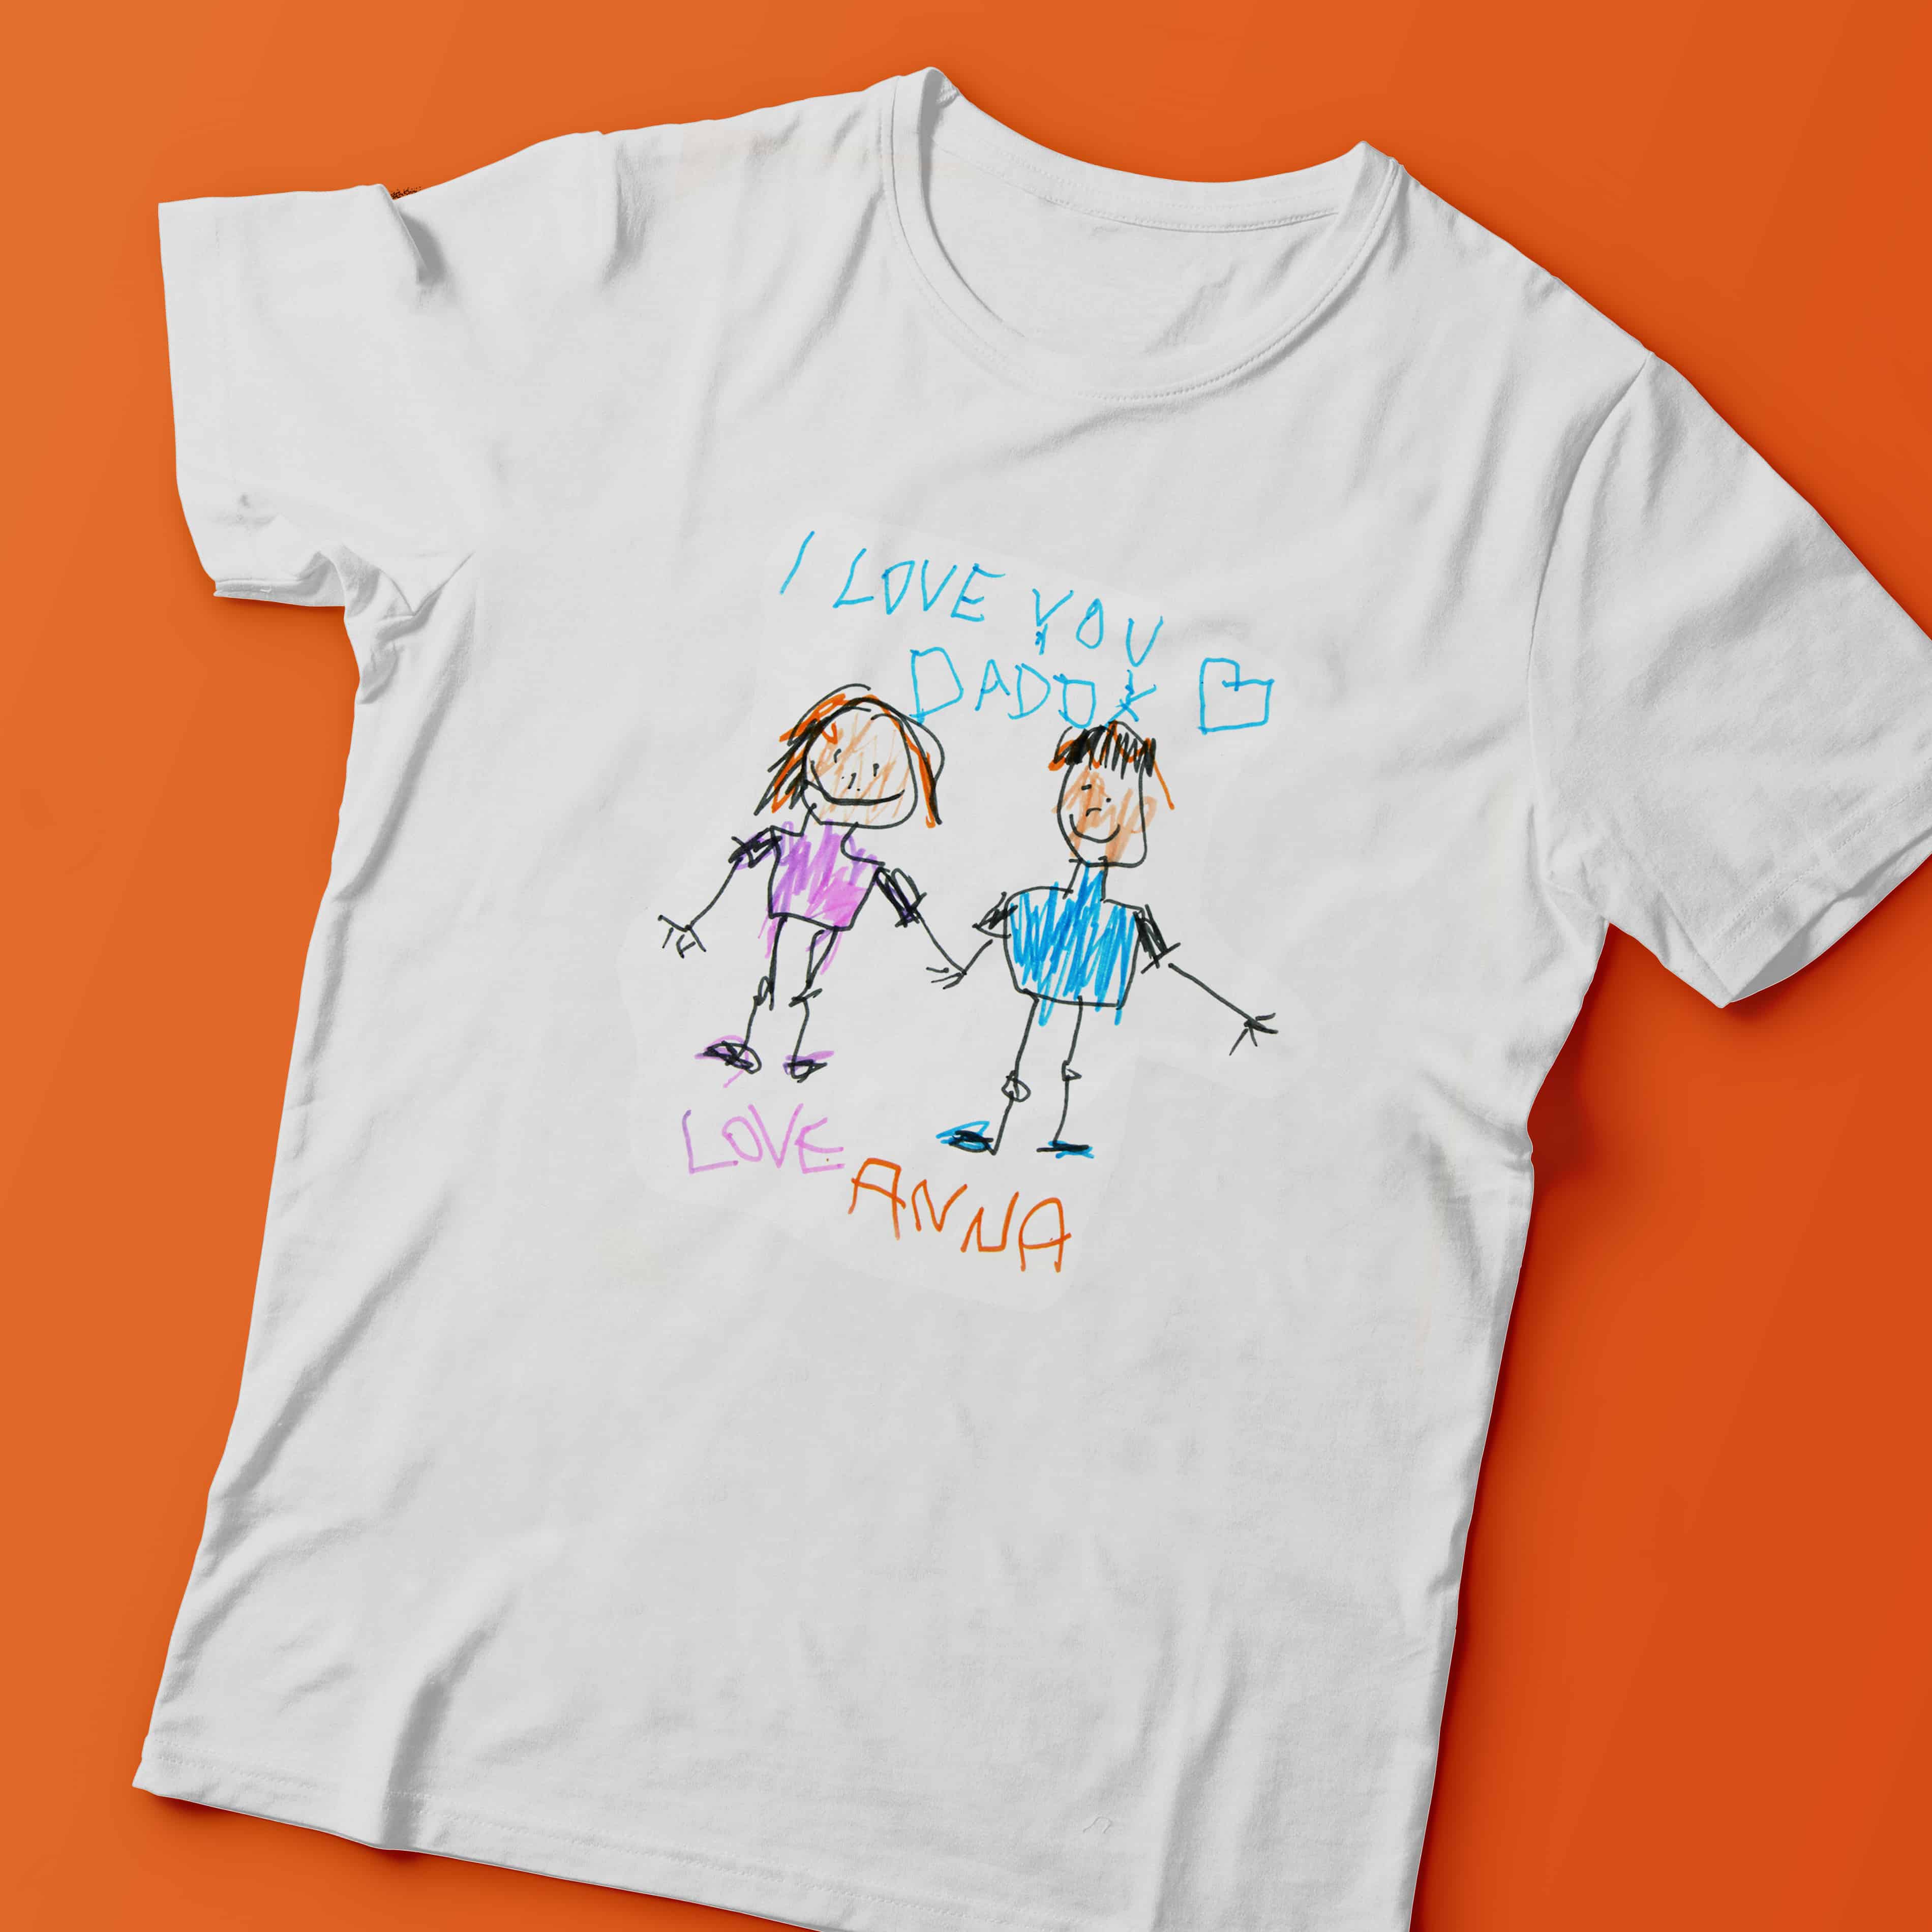 turn a drawing into a shirt for Father's Day!